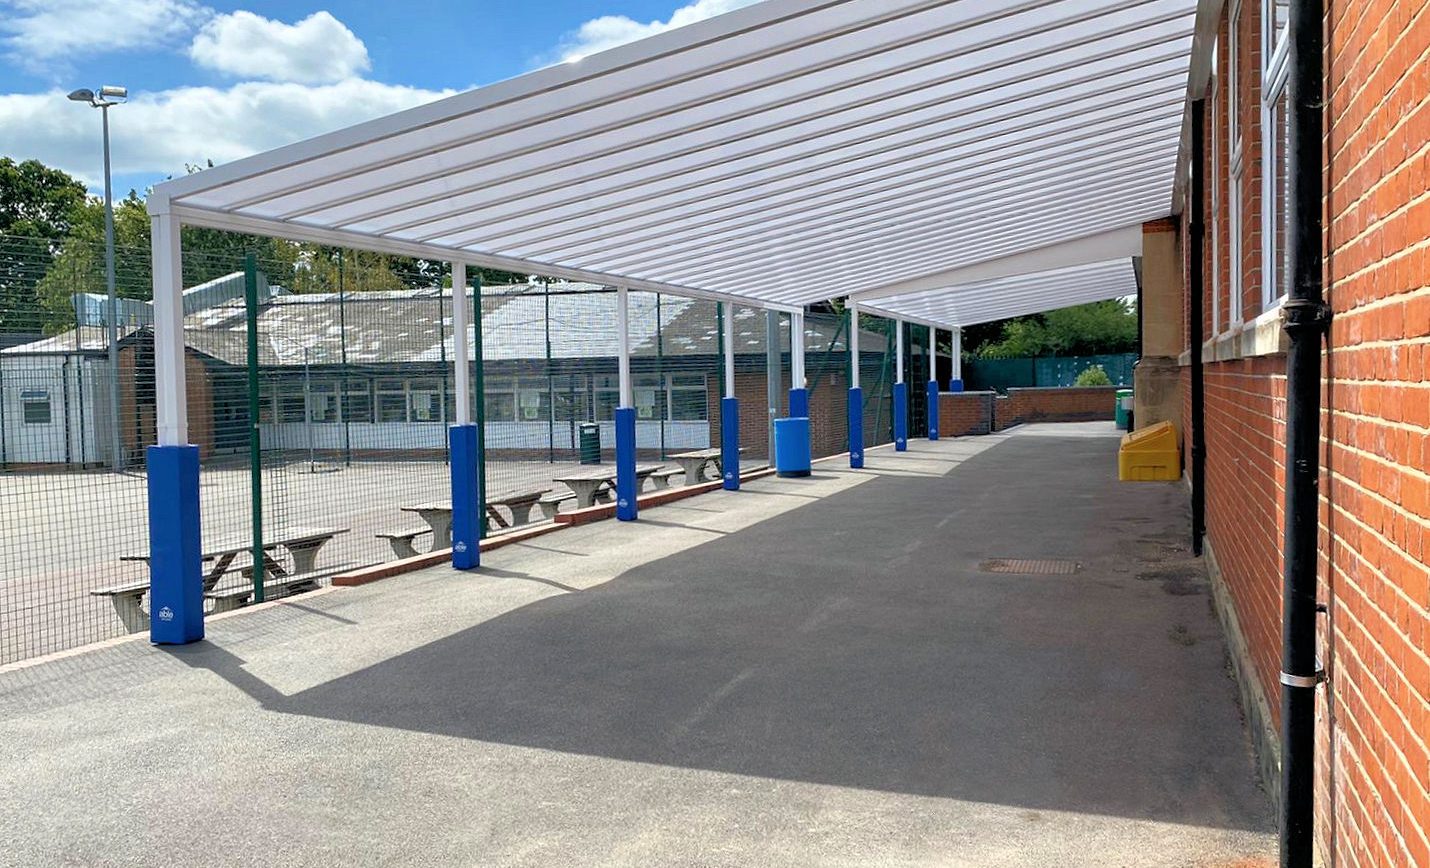 St Thomas More RC School – Wall Mounted Canopy